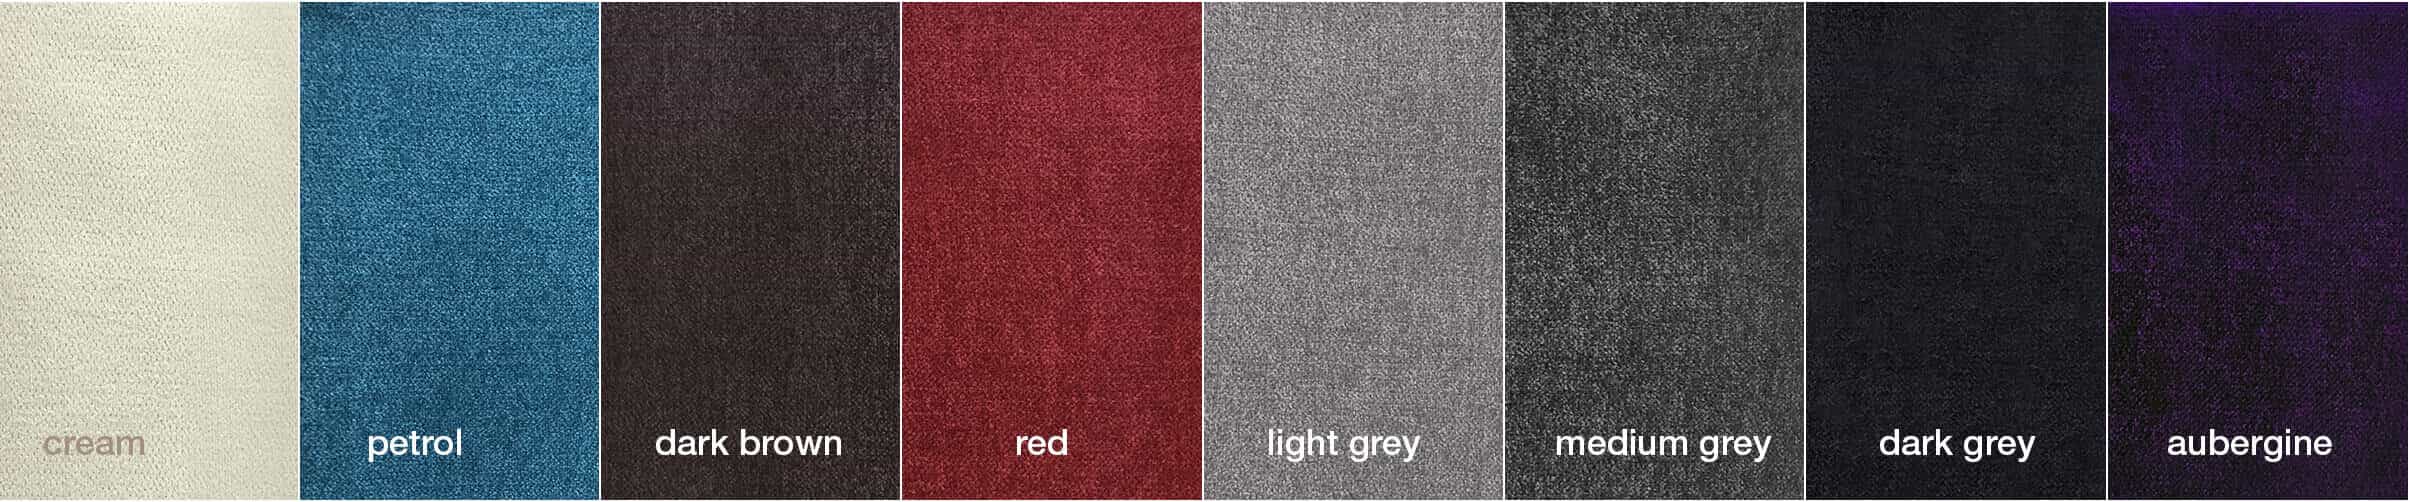 Velour color picker,dog bed, cream, red, grey, brown